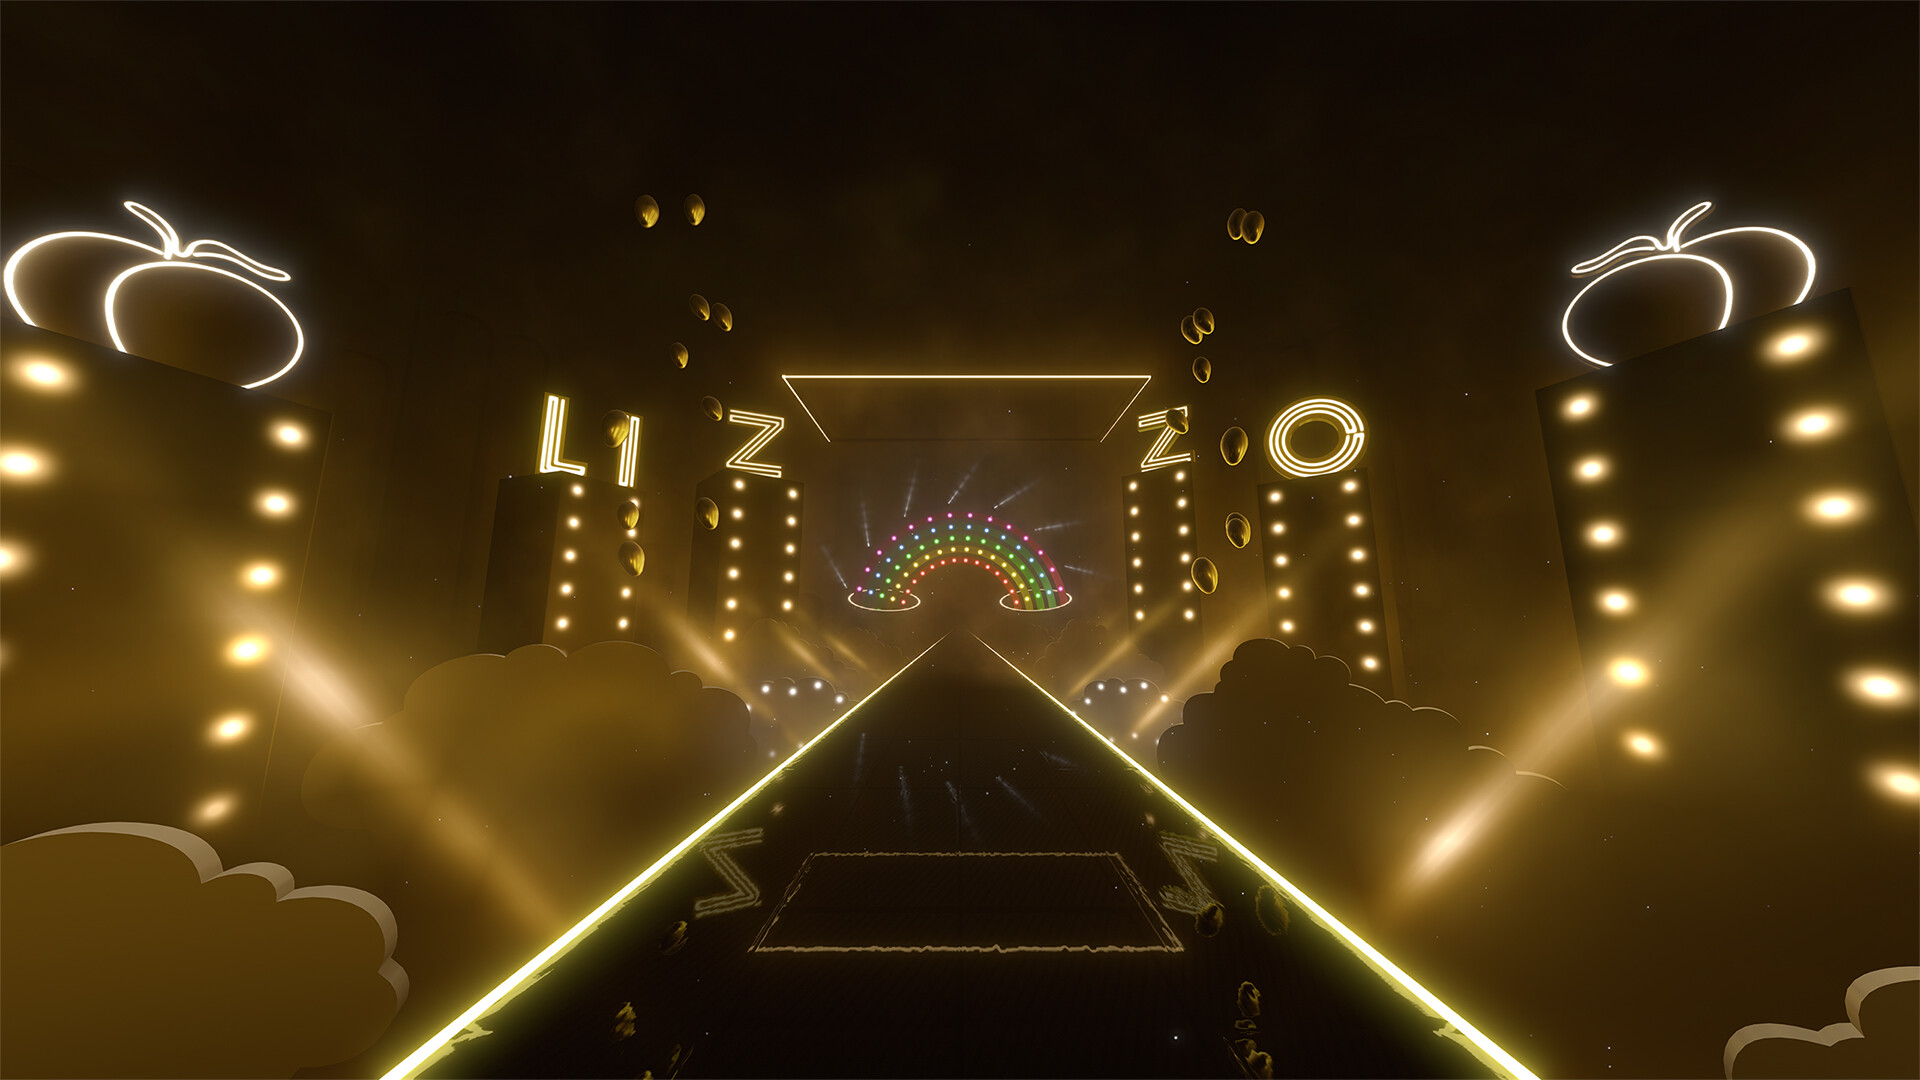 Beat Saber - Lizzo - "Good As Hell" Featured Screenshot #1